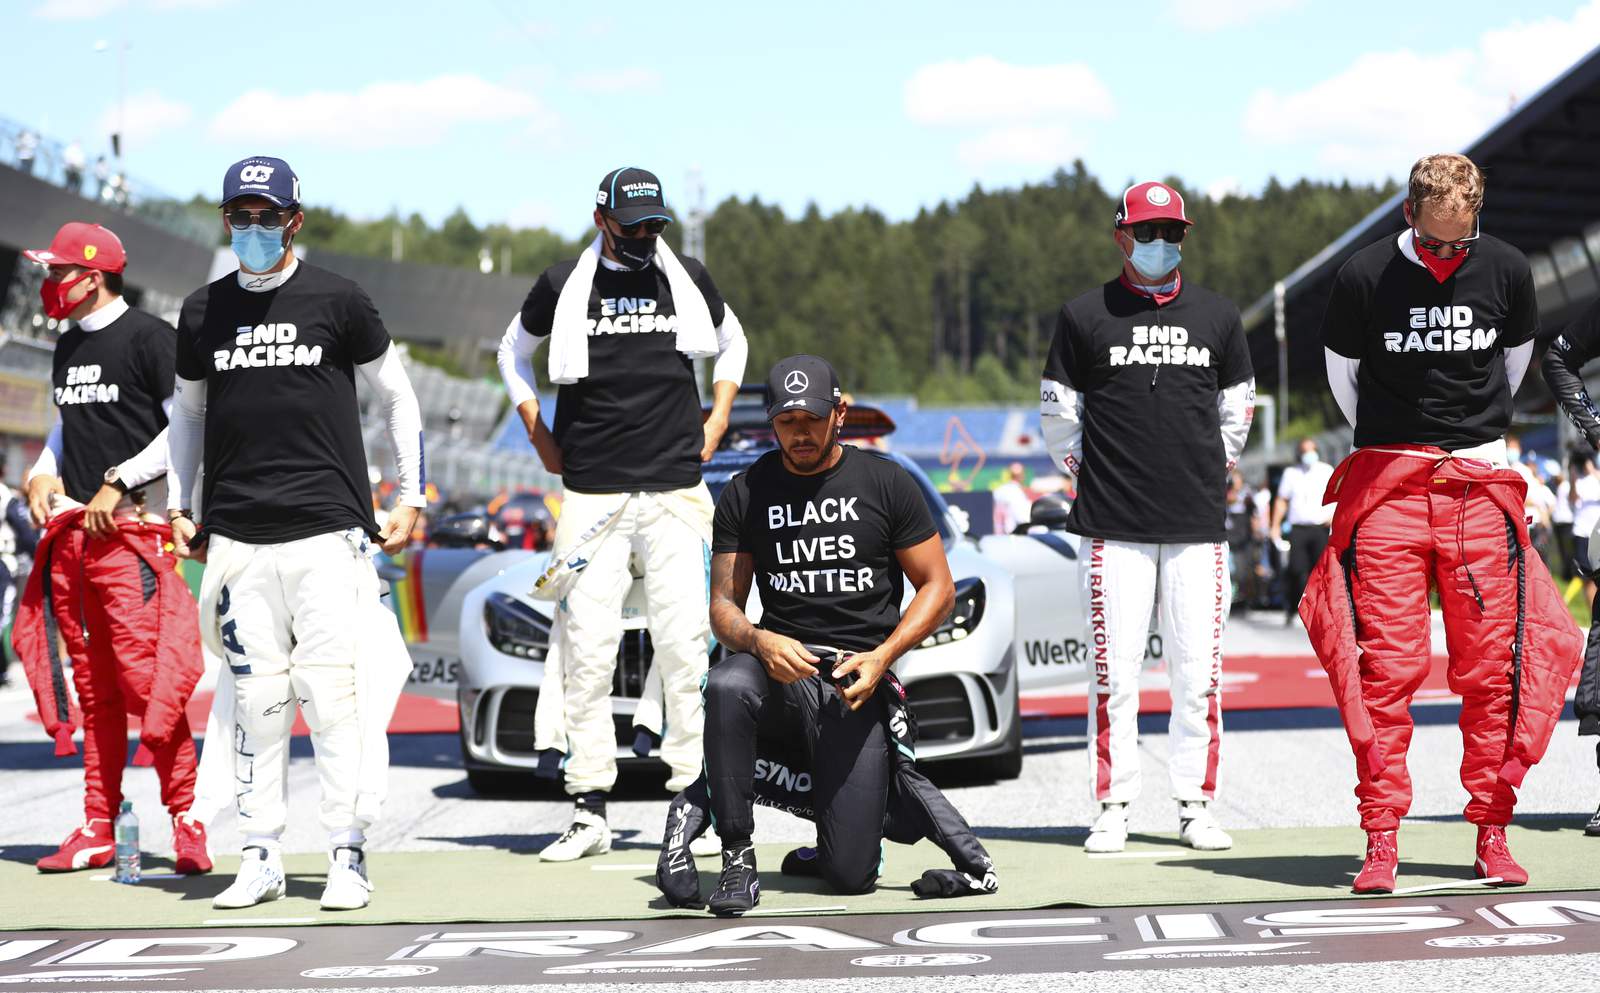 F1 Drivers all wear "End Racism" T-shirts, but 6 don't kneel